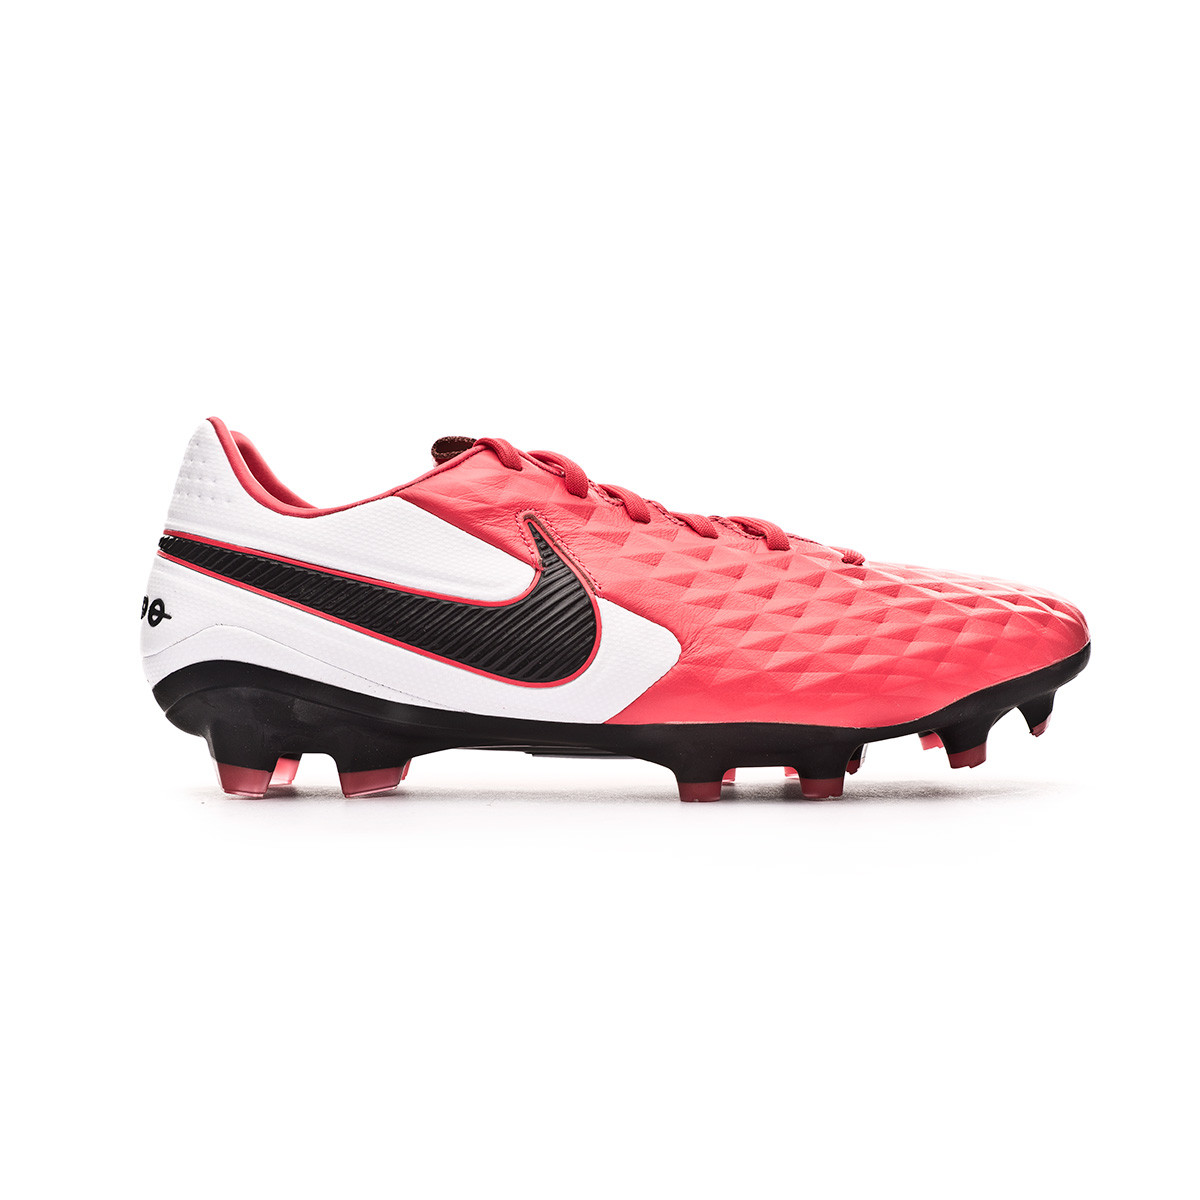 Nike React Legend 8 Pro IC Mens Football Shoes At6134.